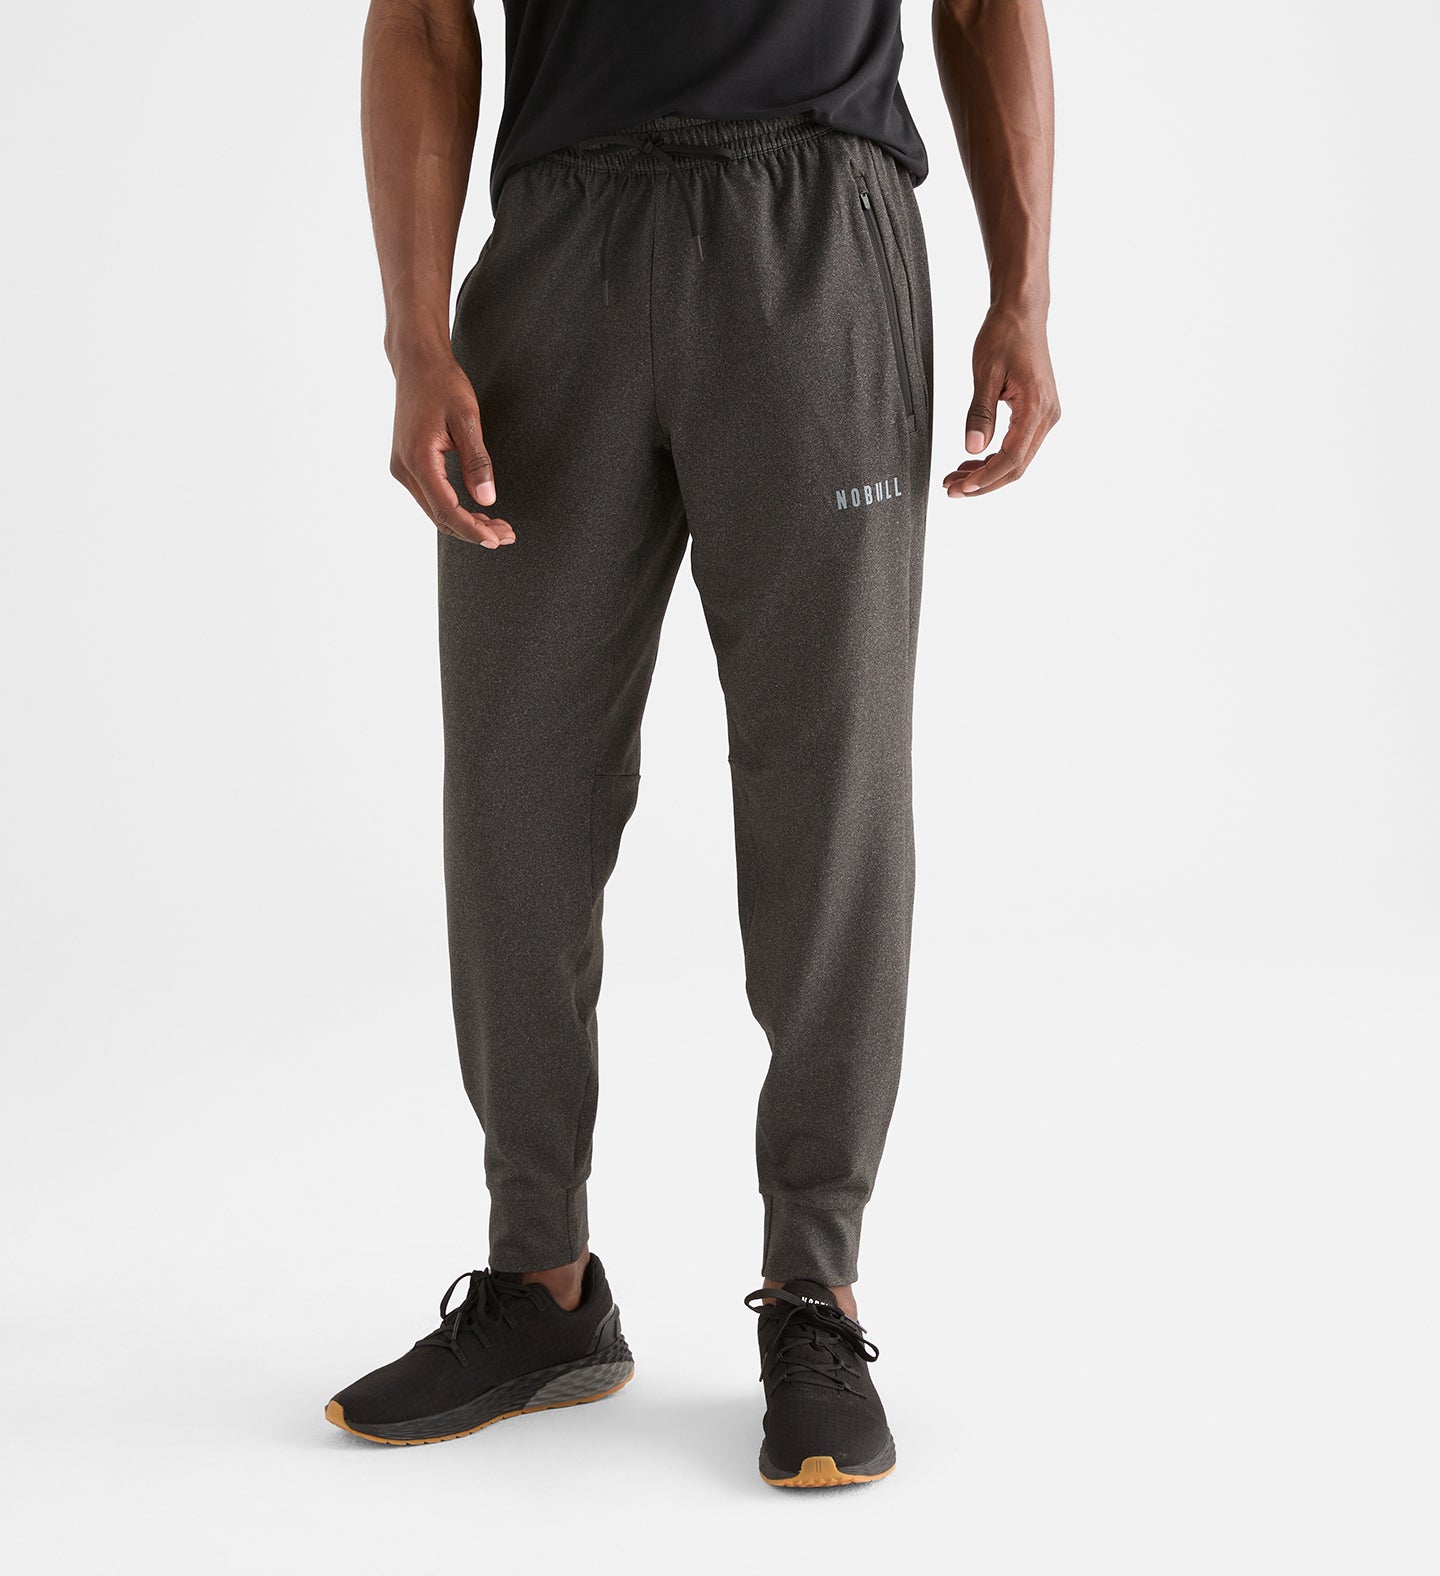 New and used Adidas Men's Joggers for sale